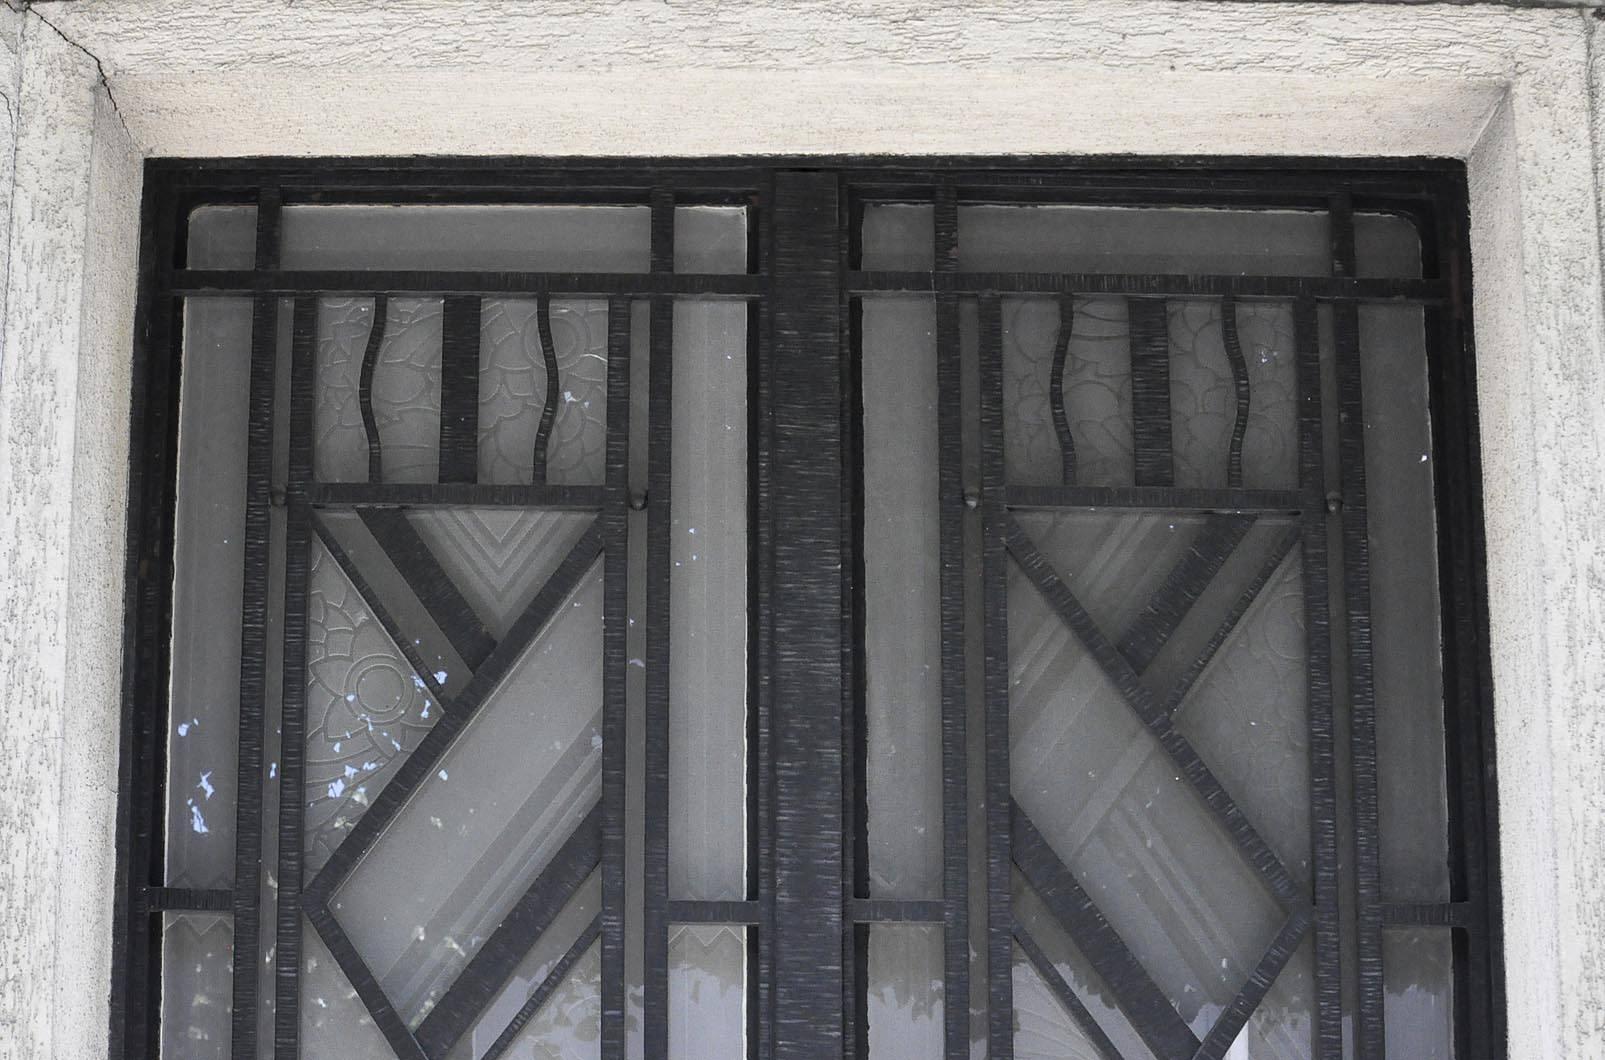 This beautiful double door in Art Deco style was made circa 1930. Its symmetrical ironwork frames engraved glass panels alternating straight lines and stylized flowers. It is a rare period work.